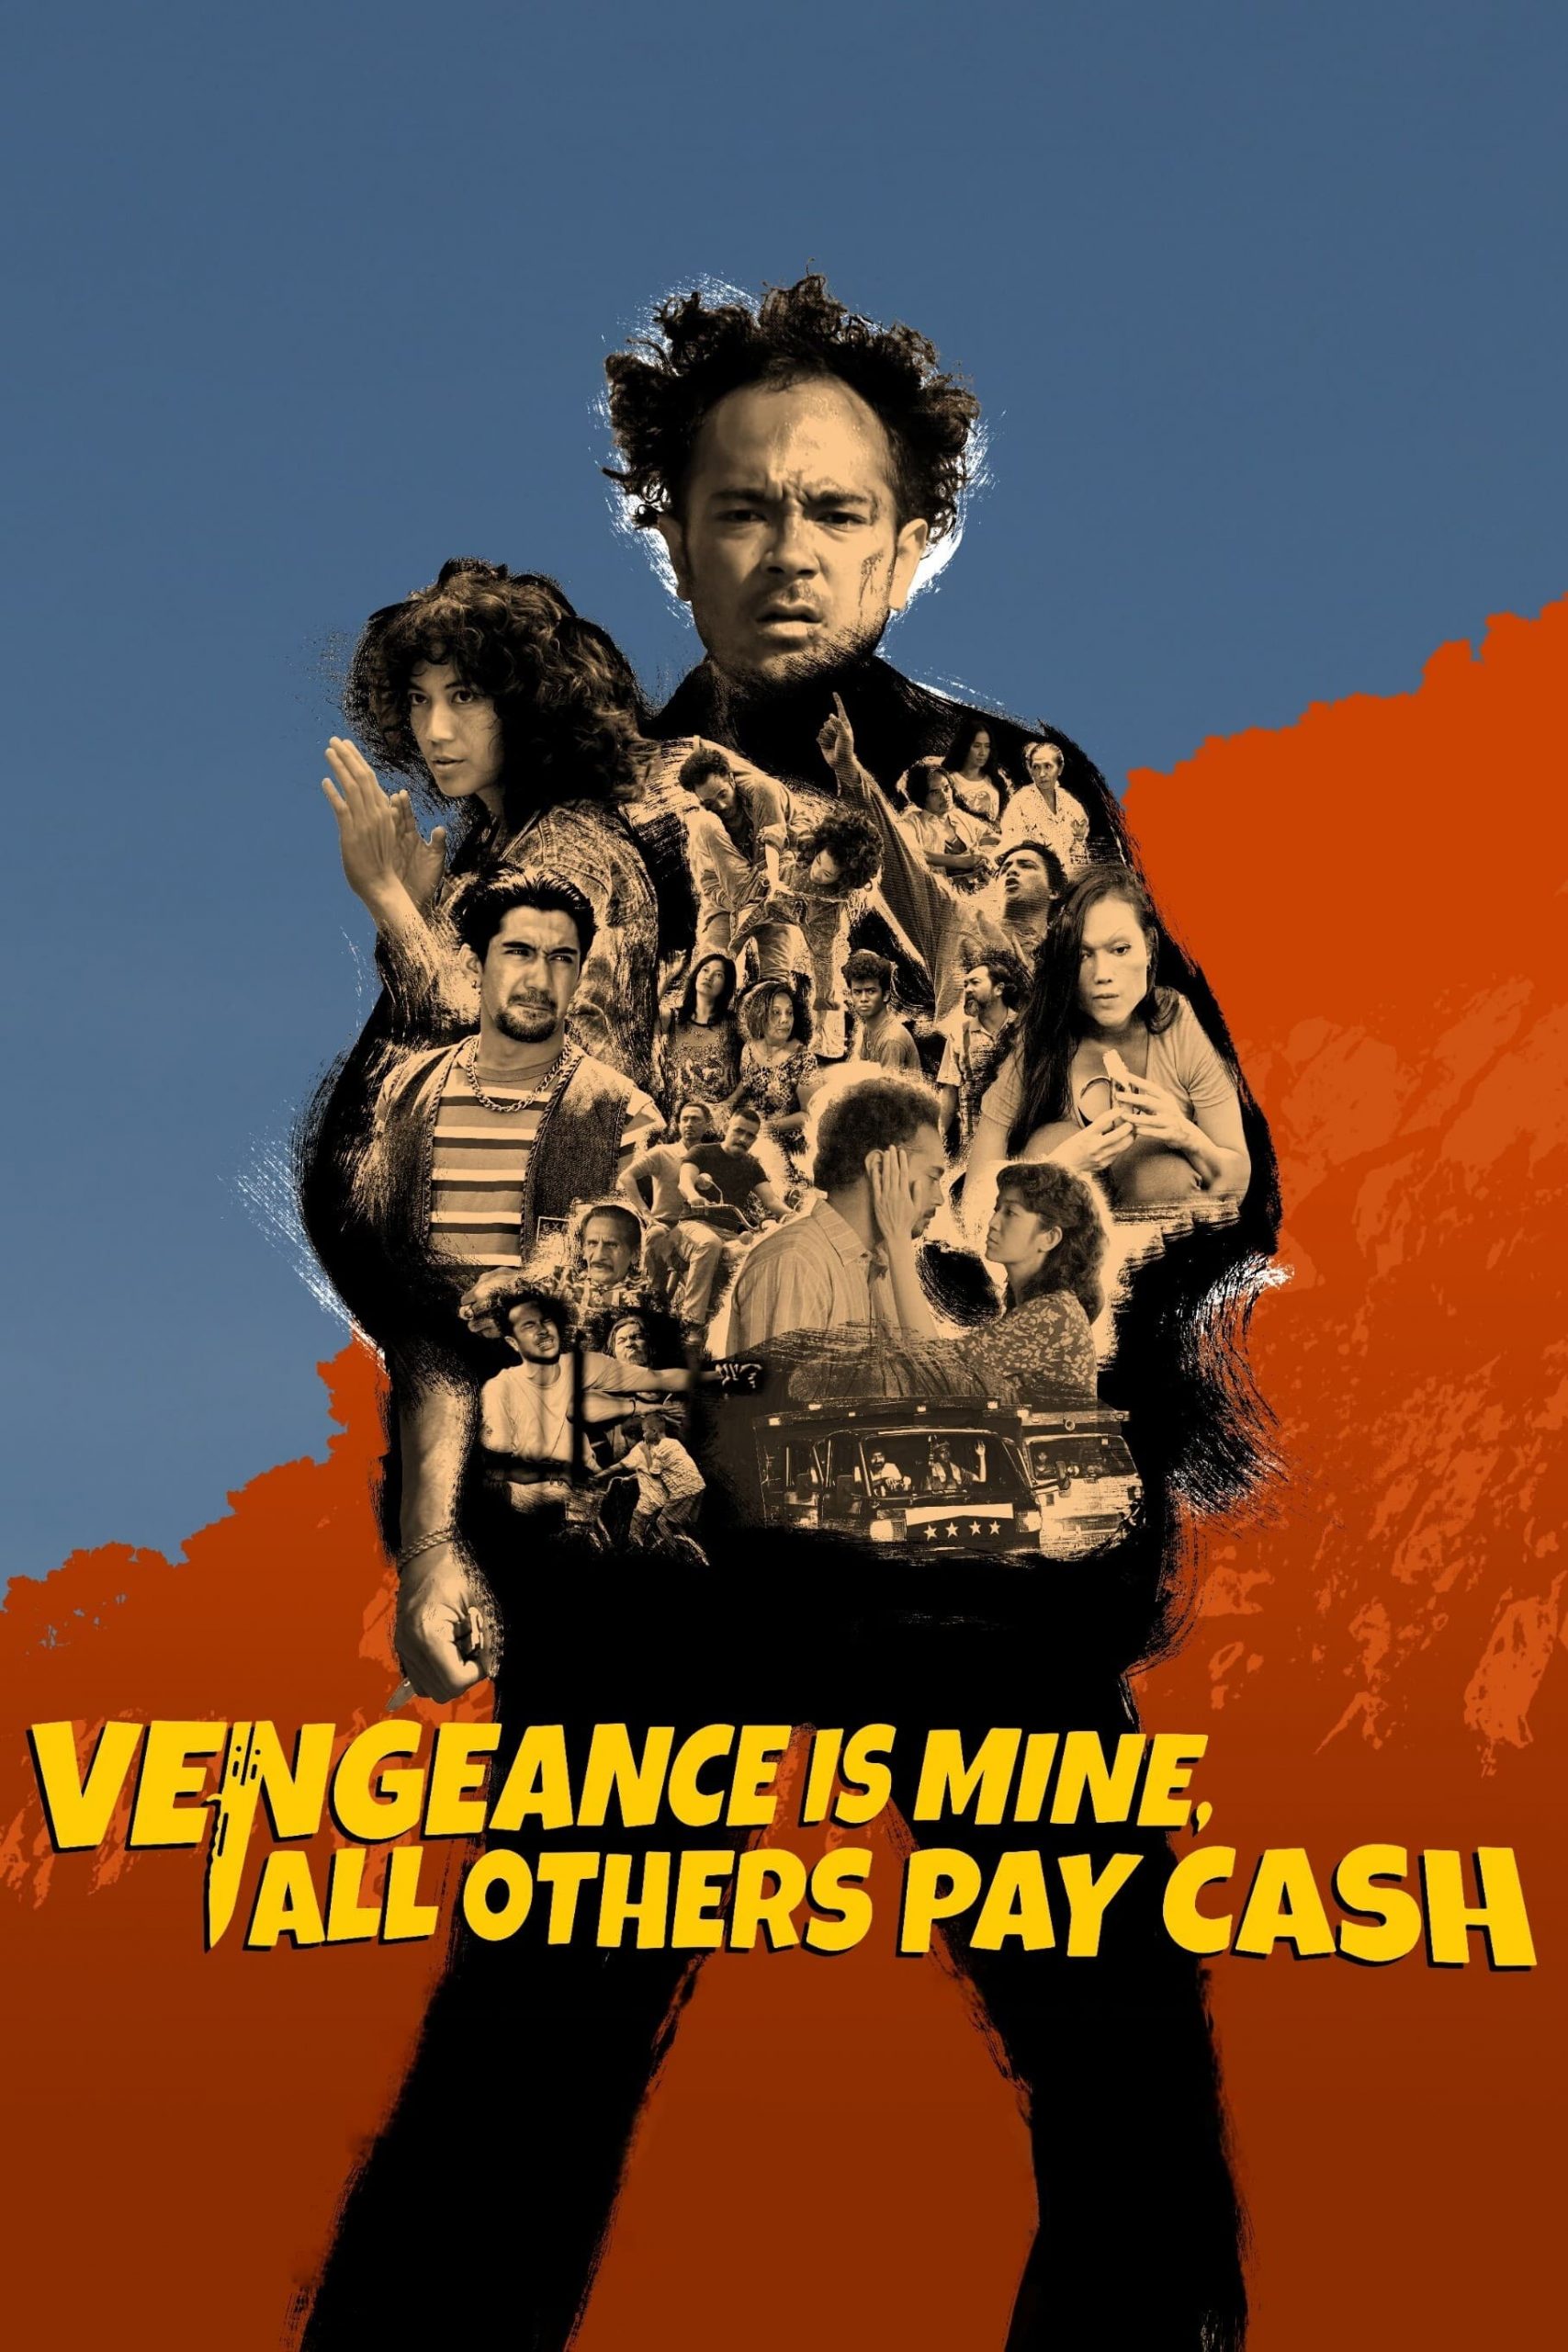 Vengeance Is Mine, All Others Pay Cash